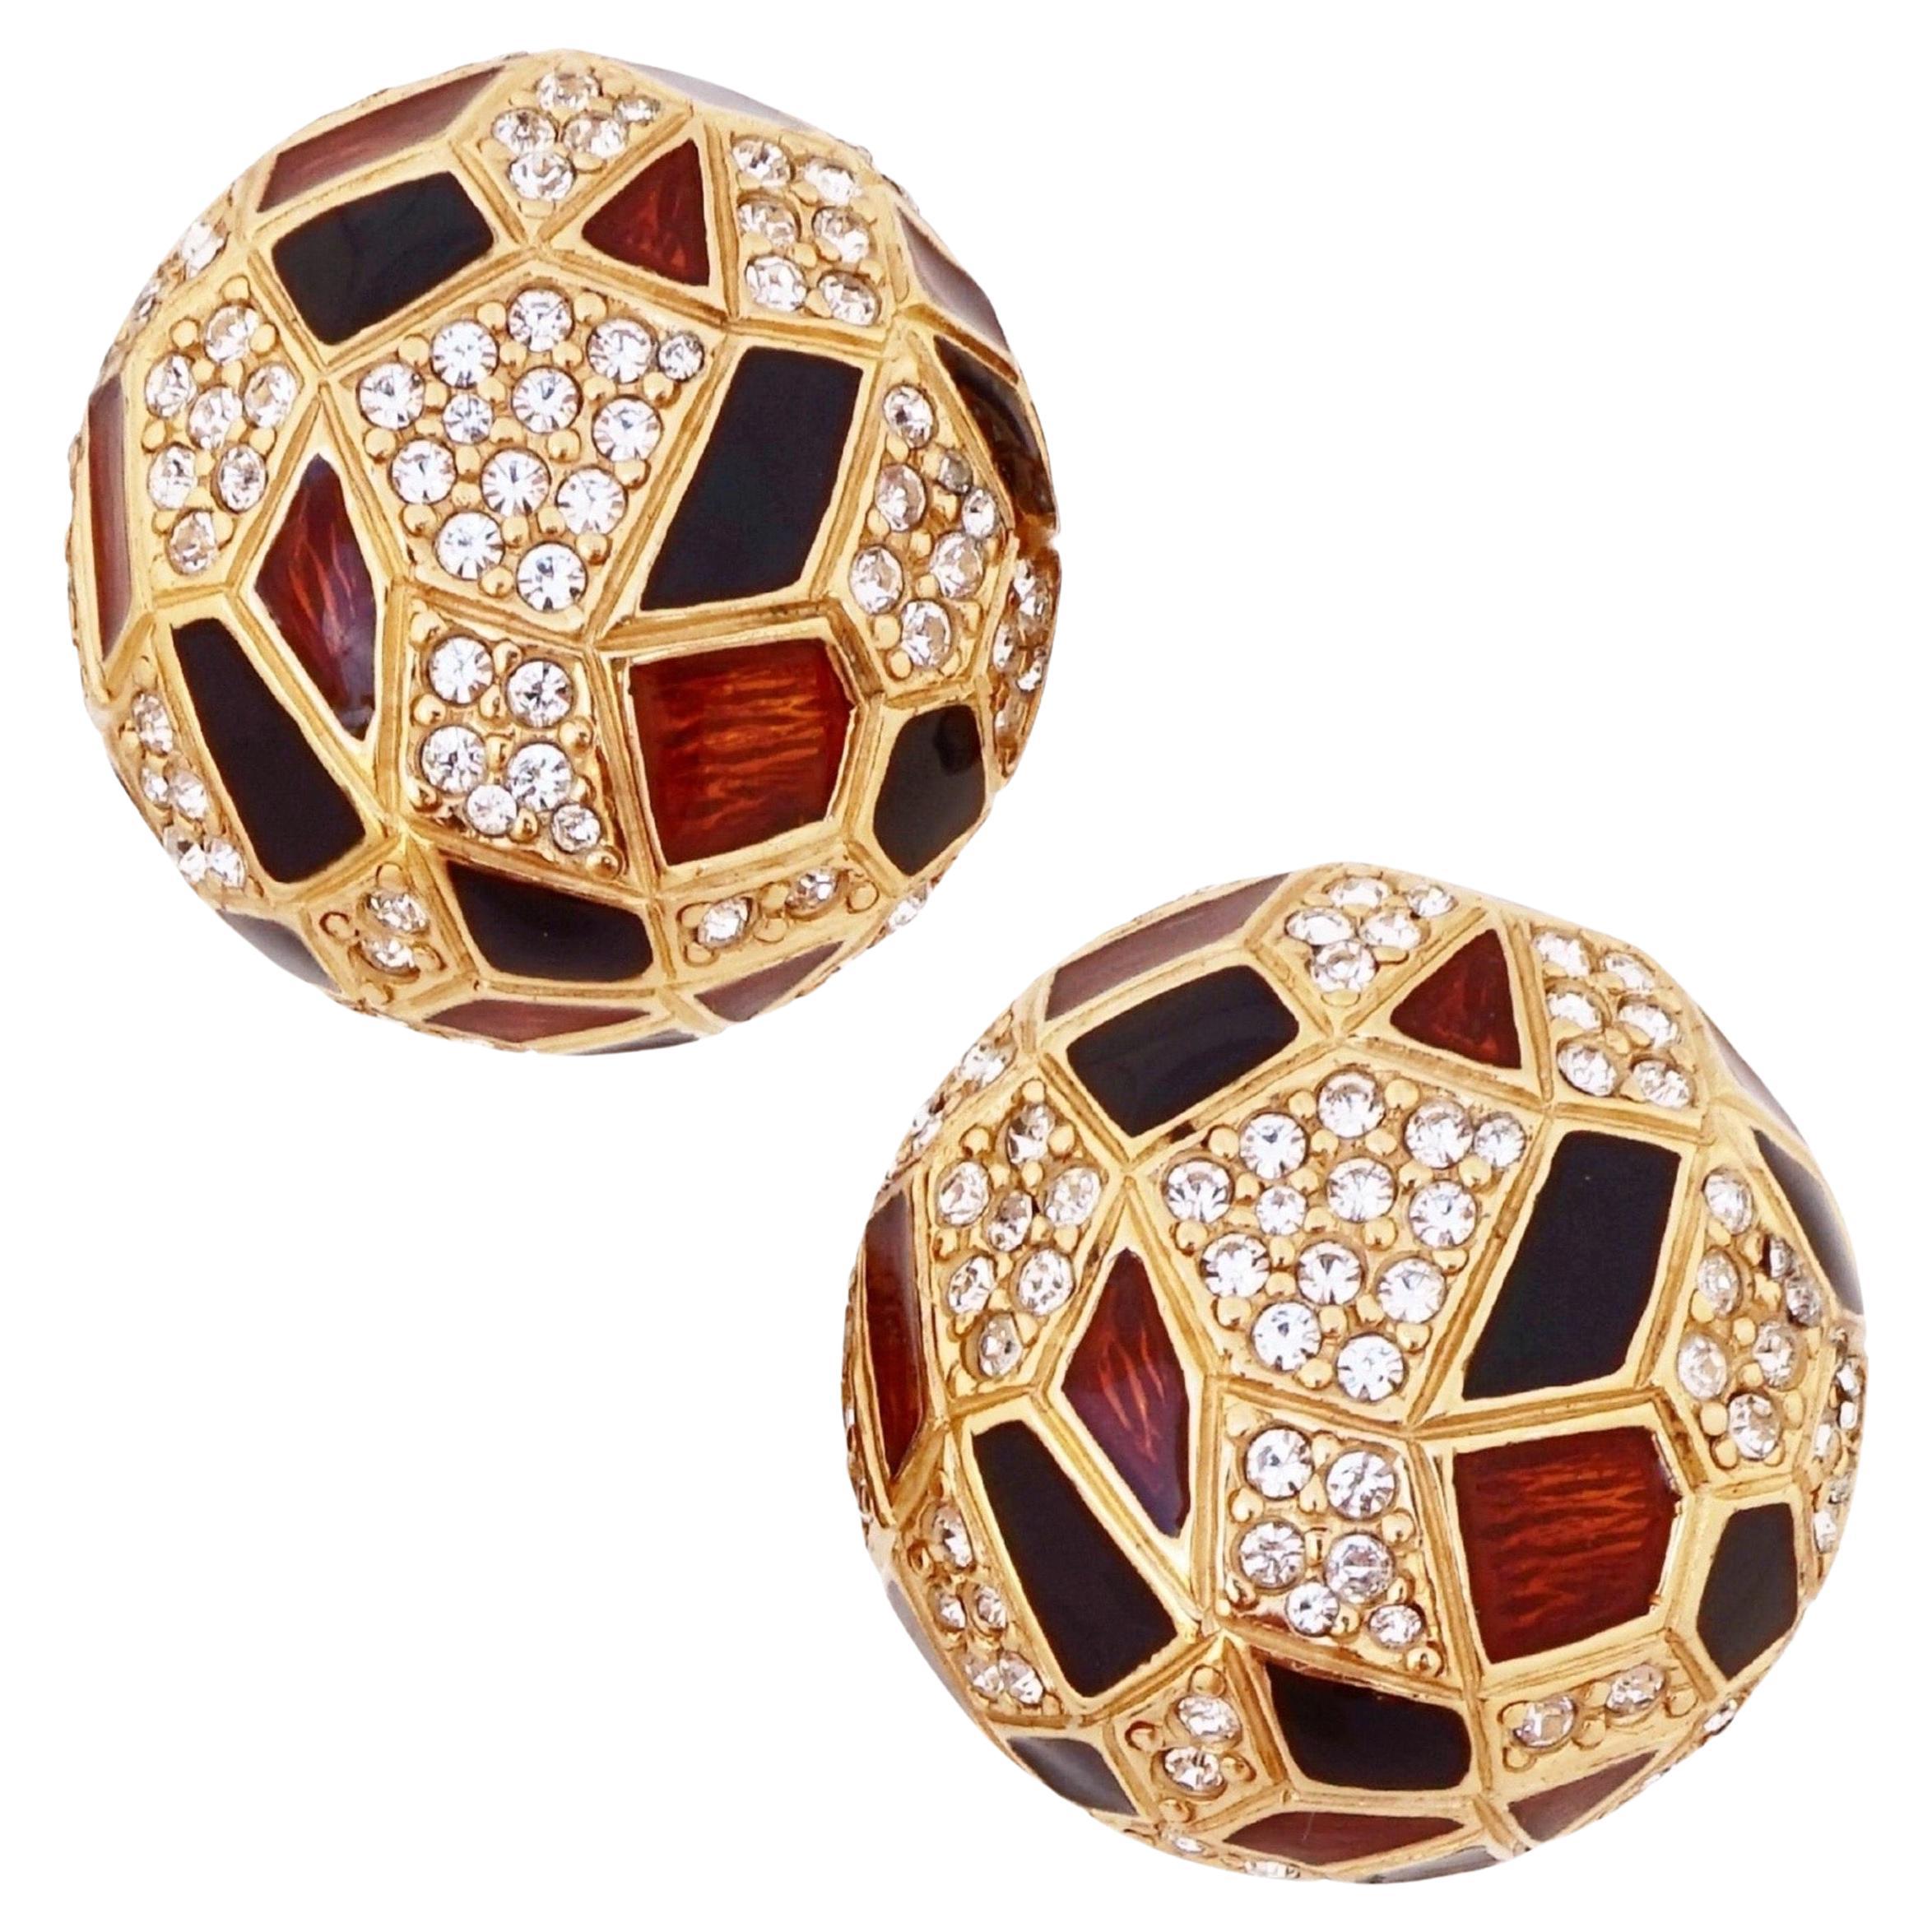 Geometric Enameled Dome Earrings With Crystal Pavé By Ciner, 1980s For Sale